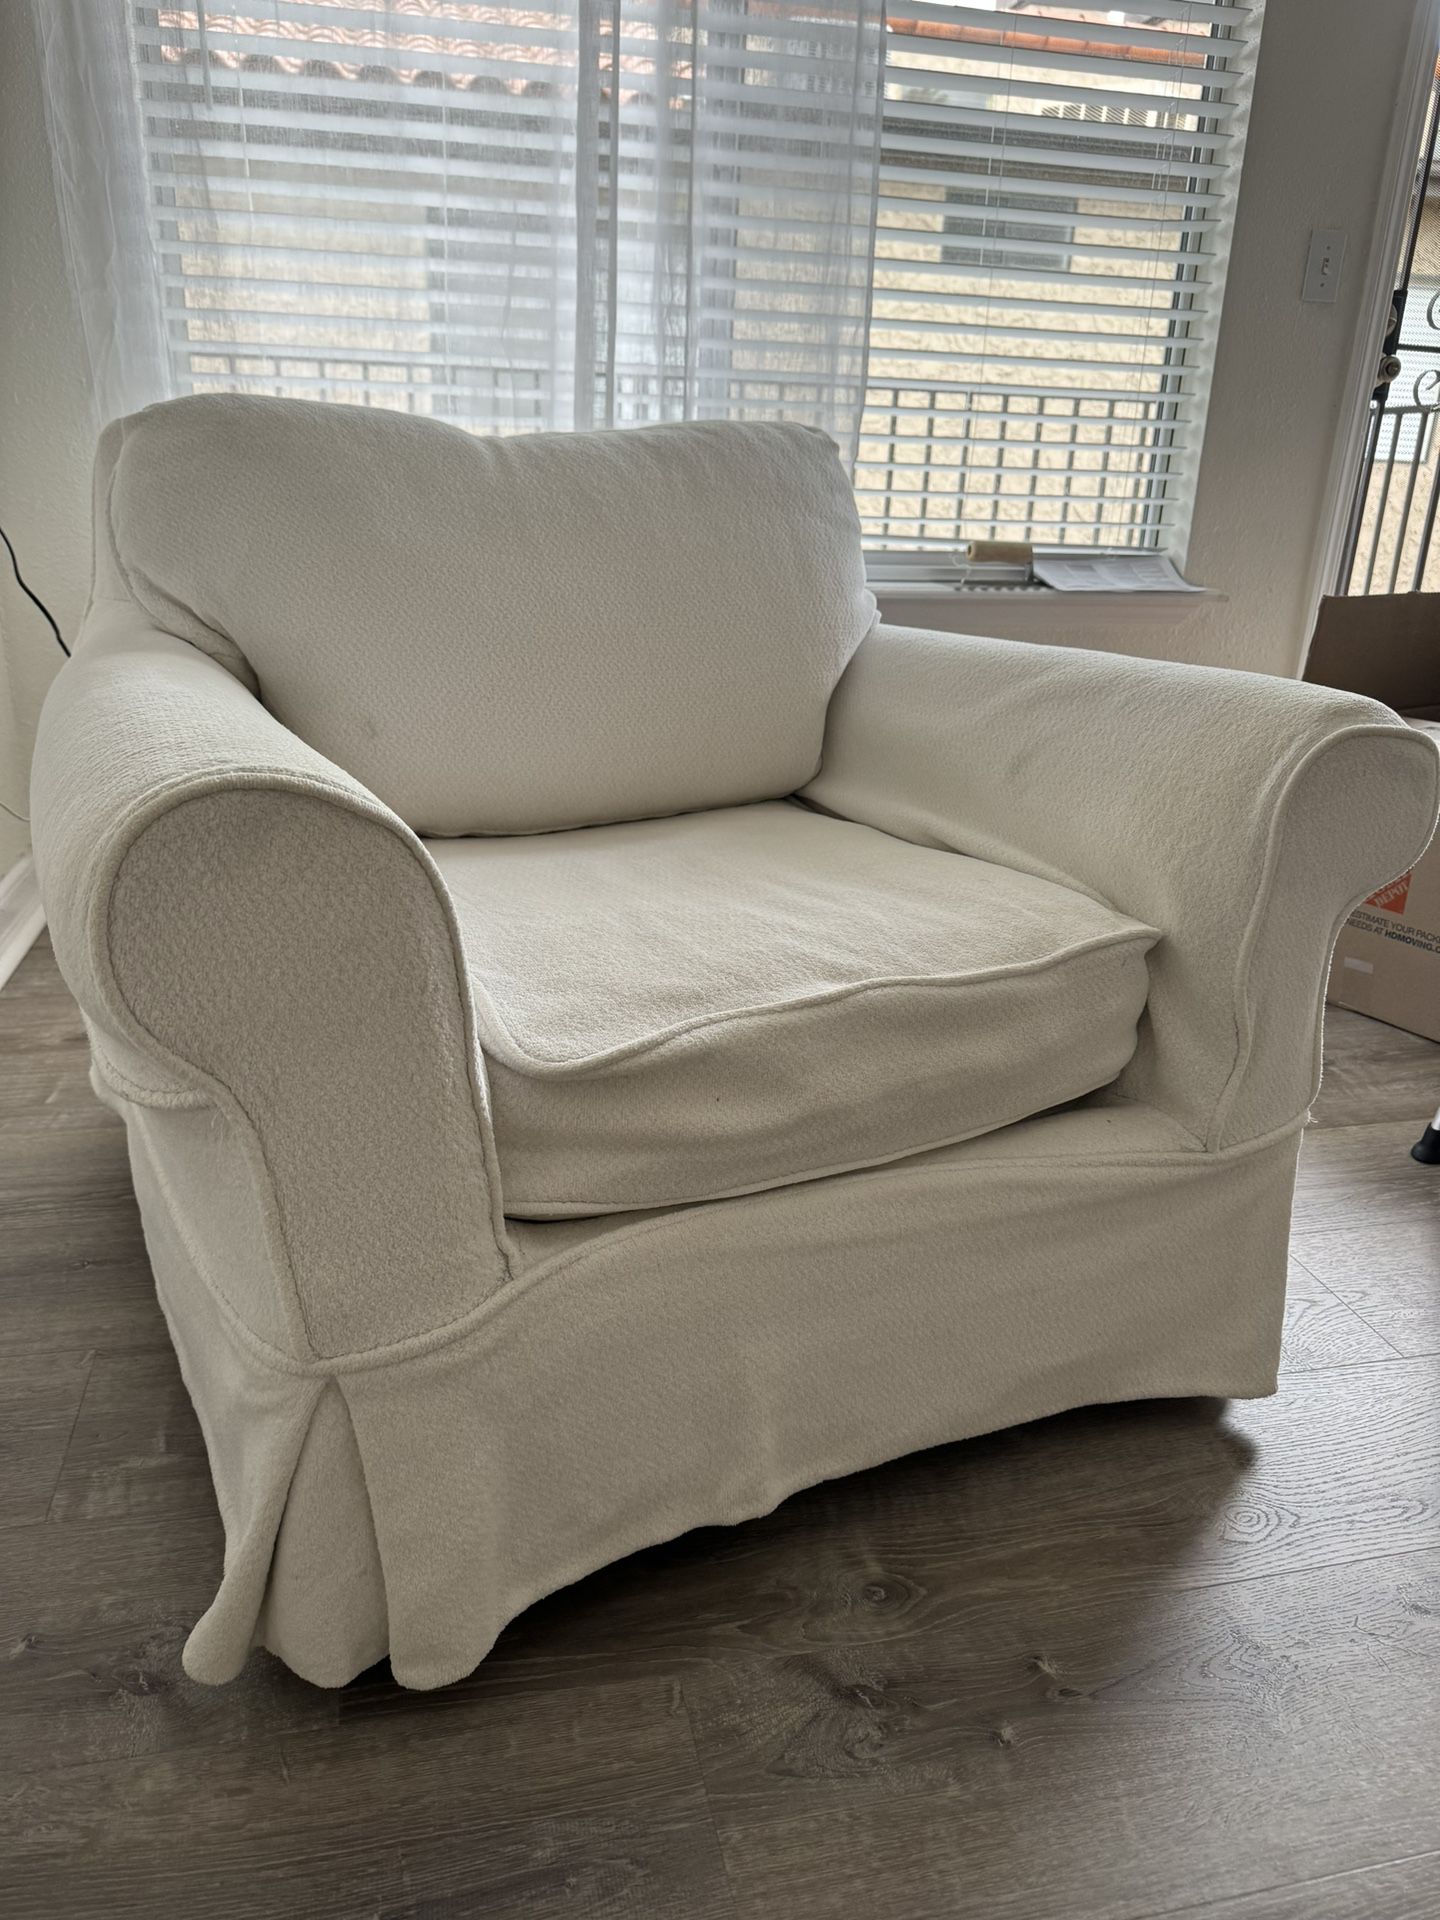 Oversized White Chair 